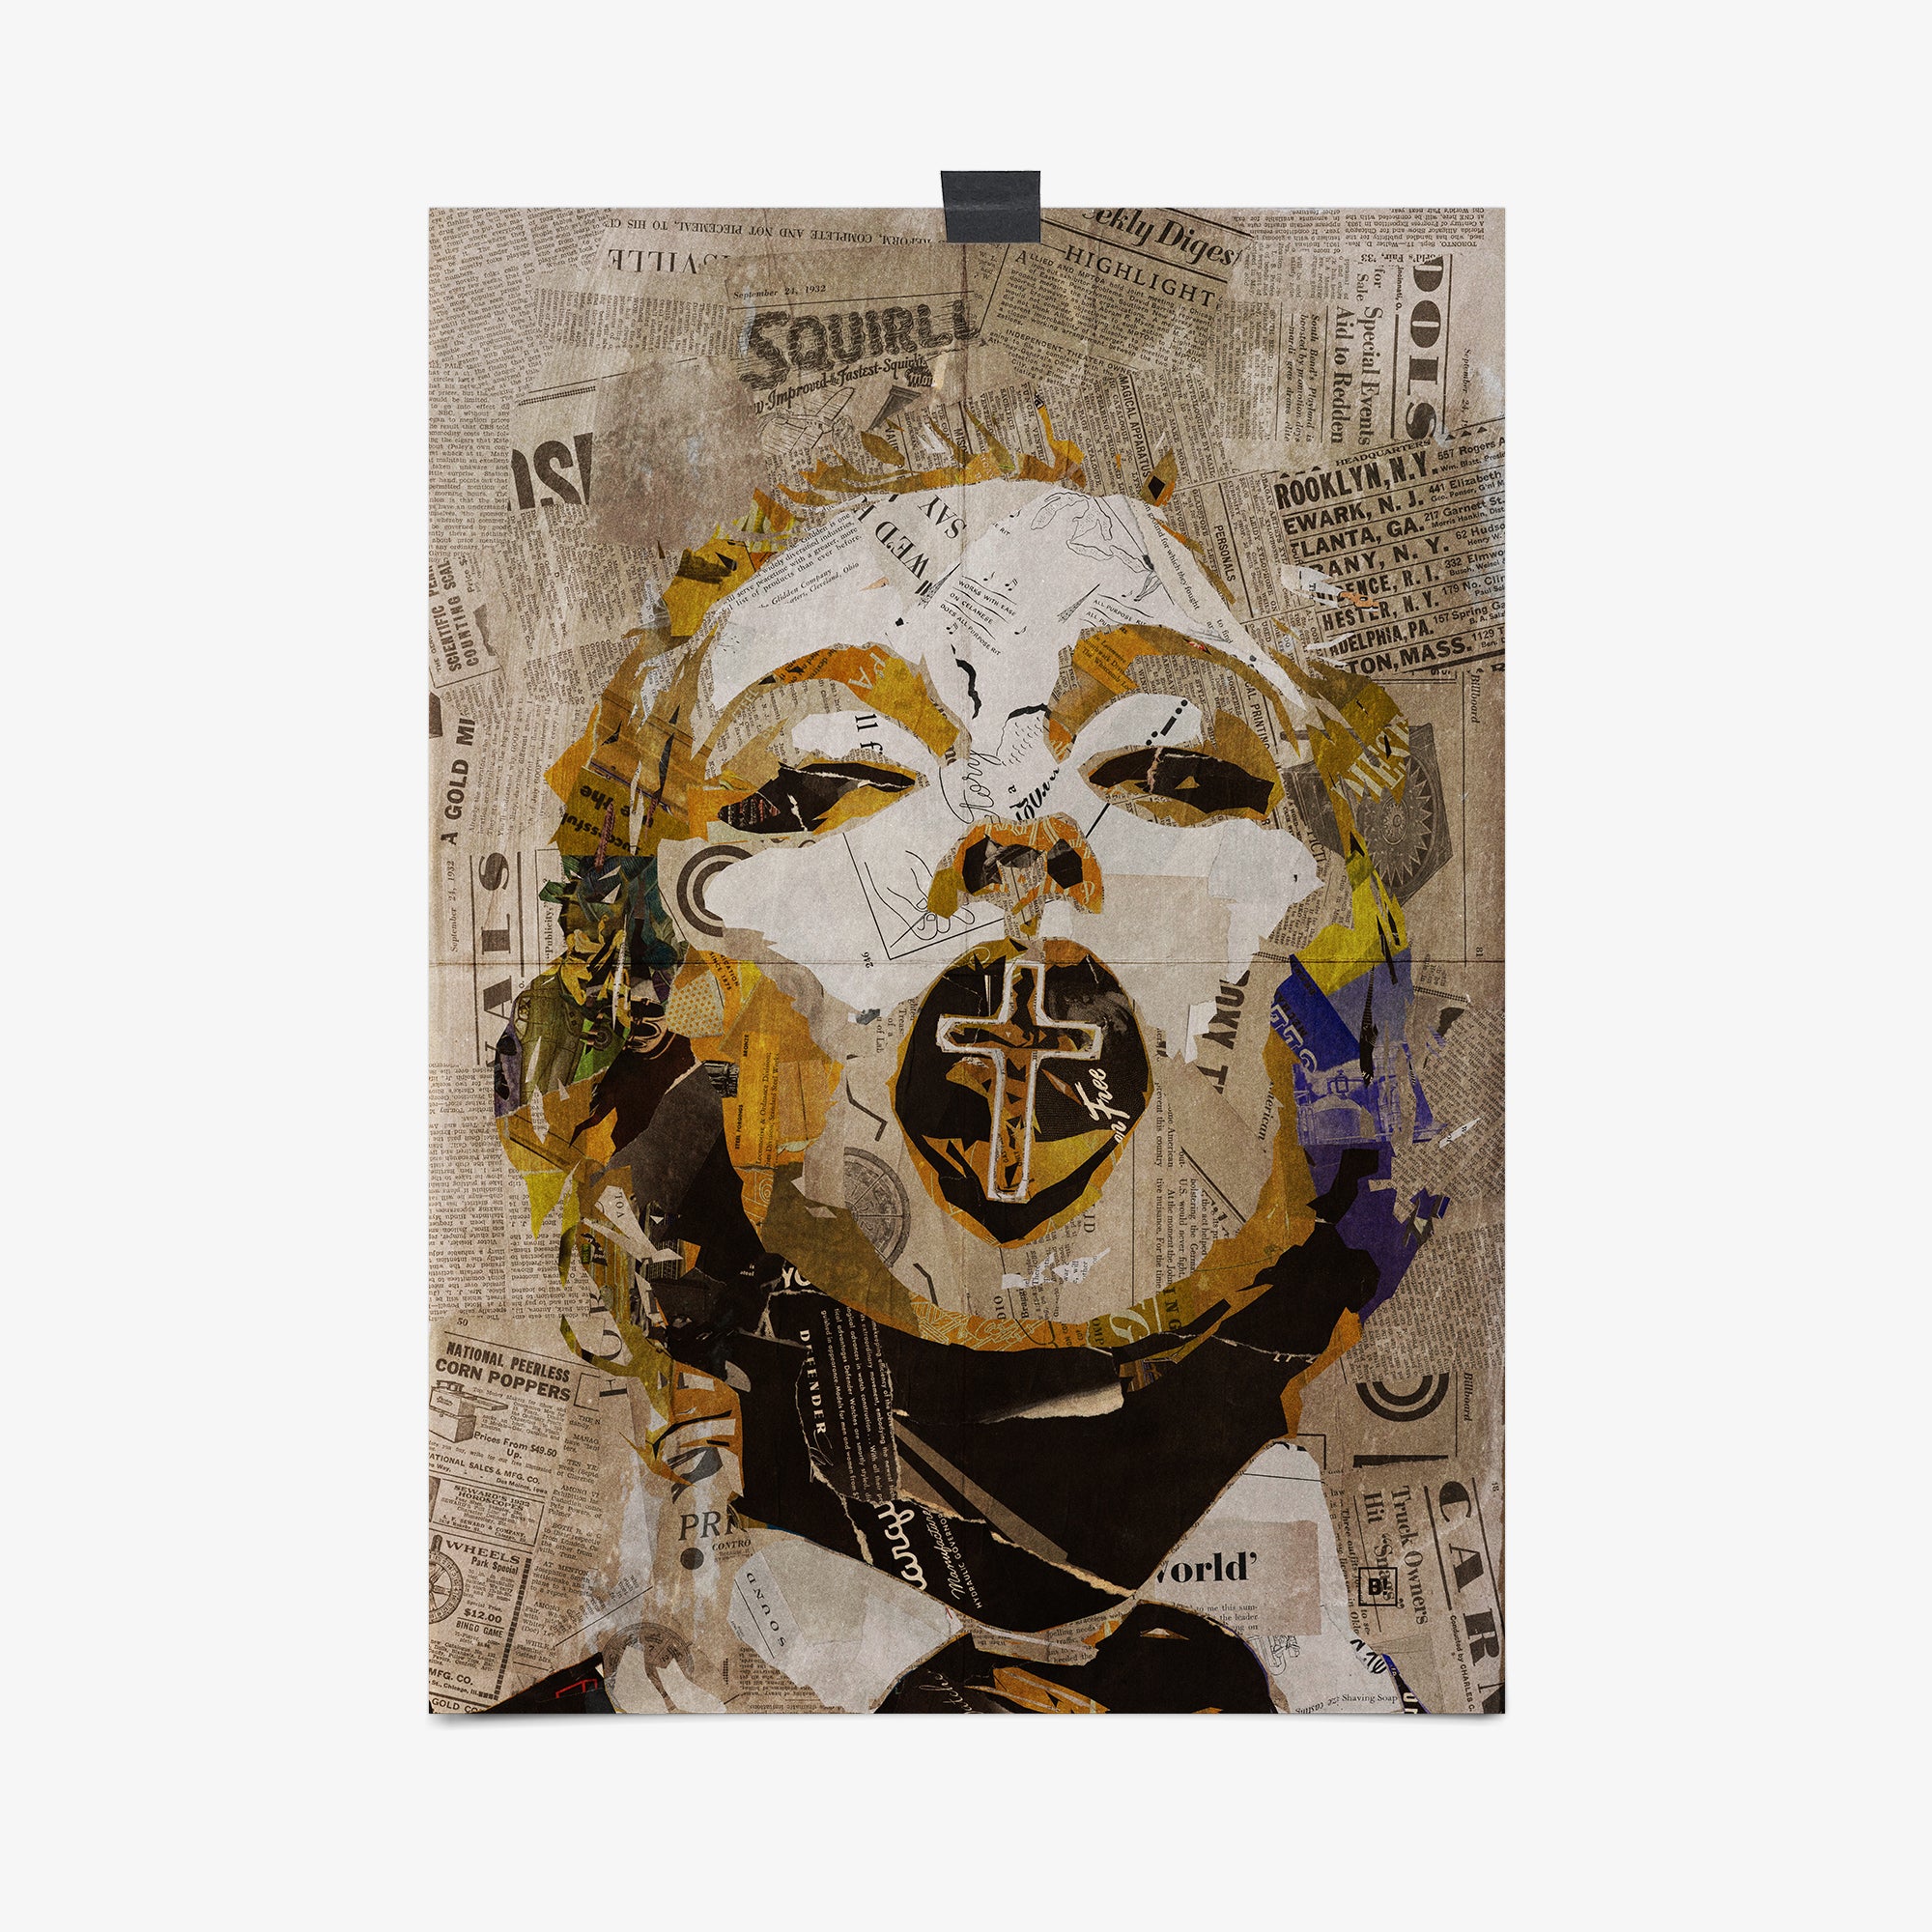 Be inspired by our iconic collage portrait art print of Madonna. This artwork was printed using the giclée process on archival acid-free paper, capturing its timeless beauty in every detail.